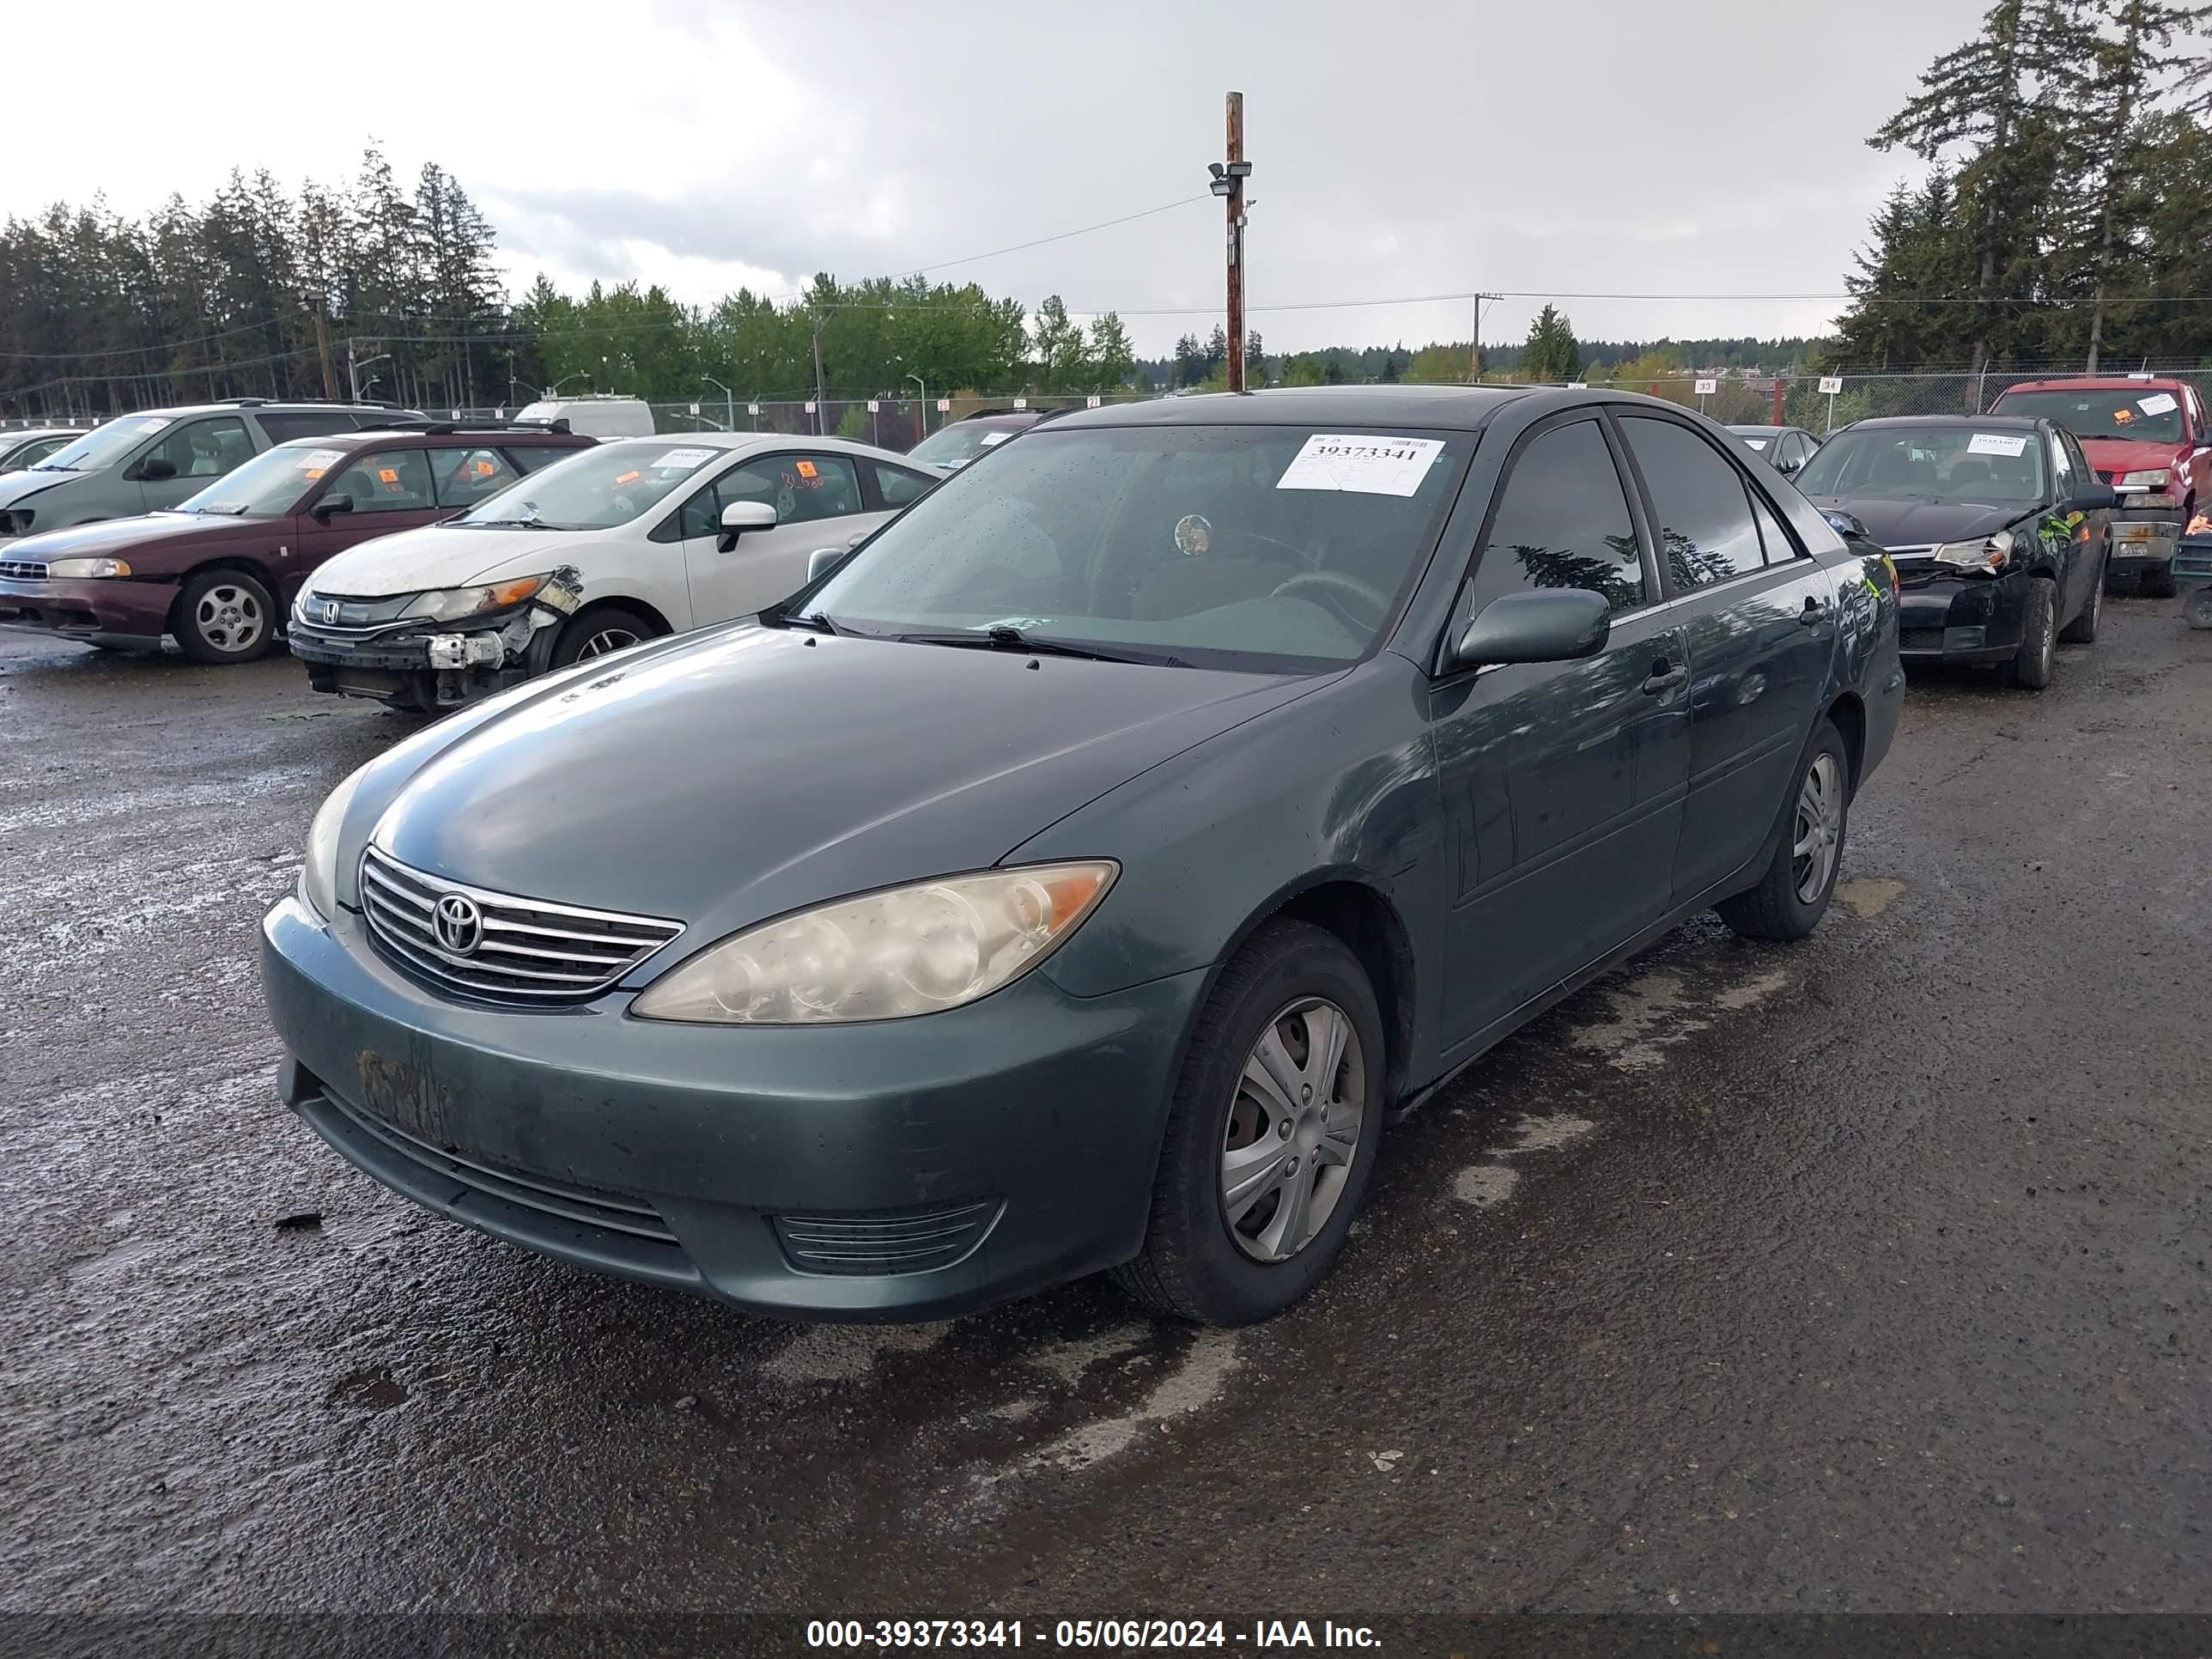 JTDBE30K153035648 2005 Toyota Camry Le